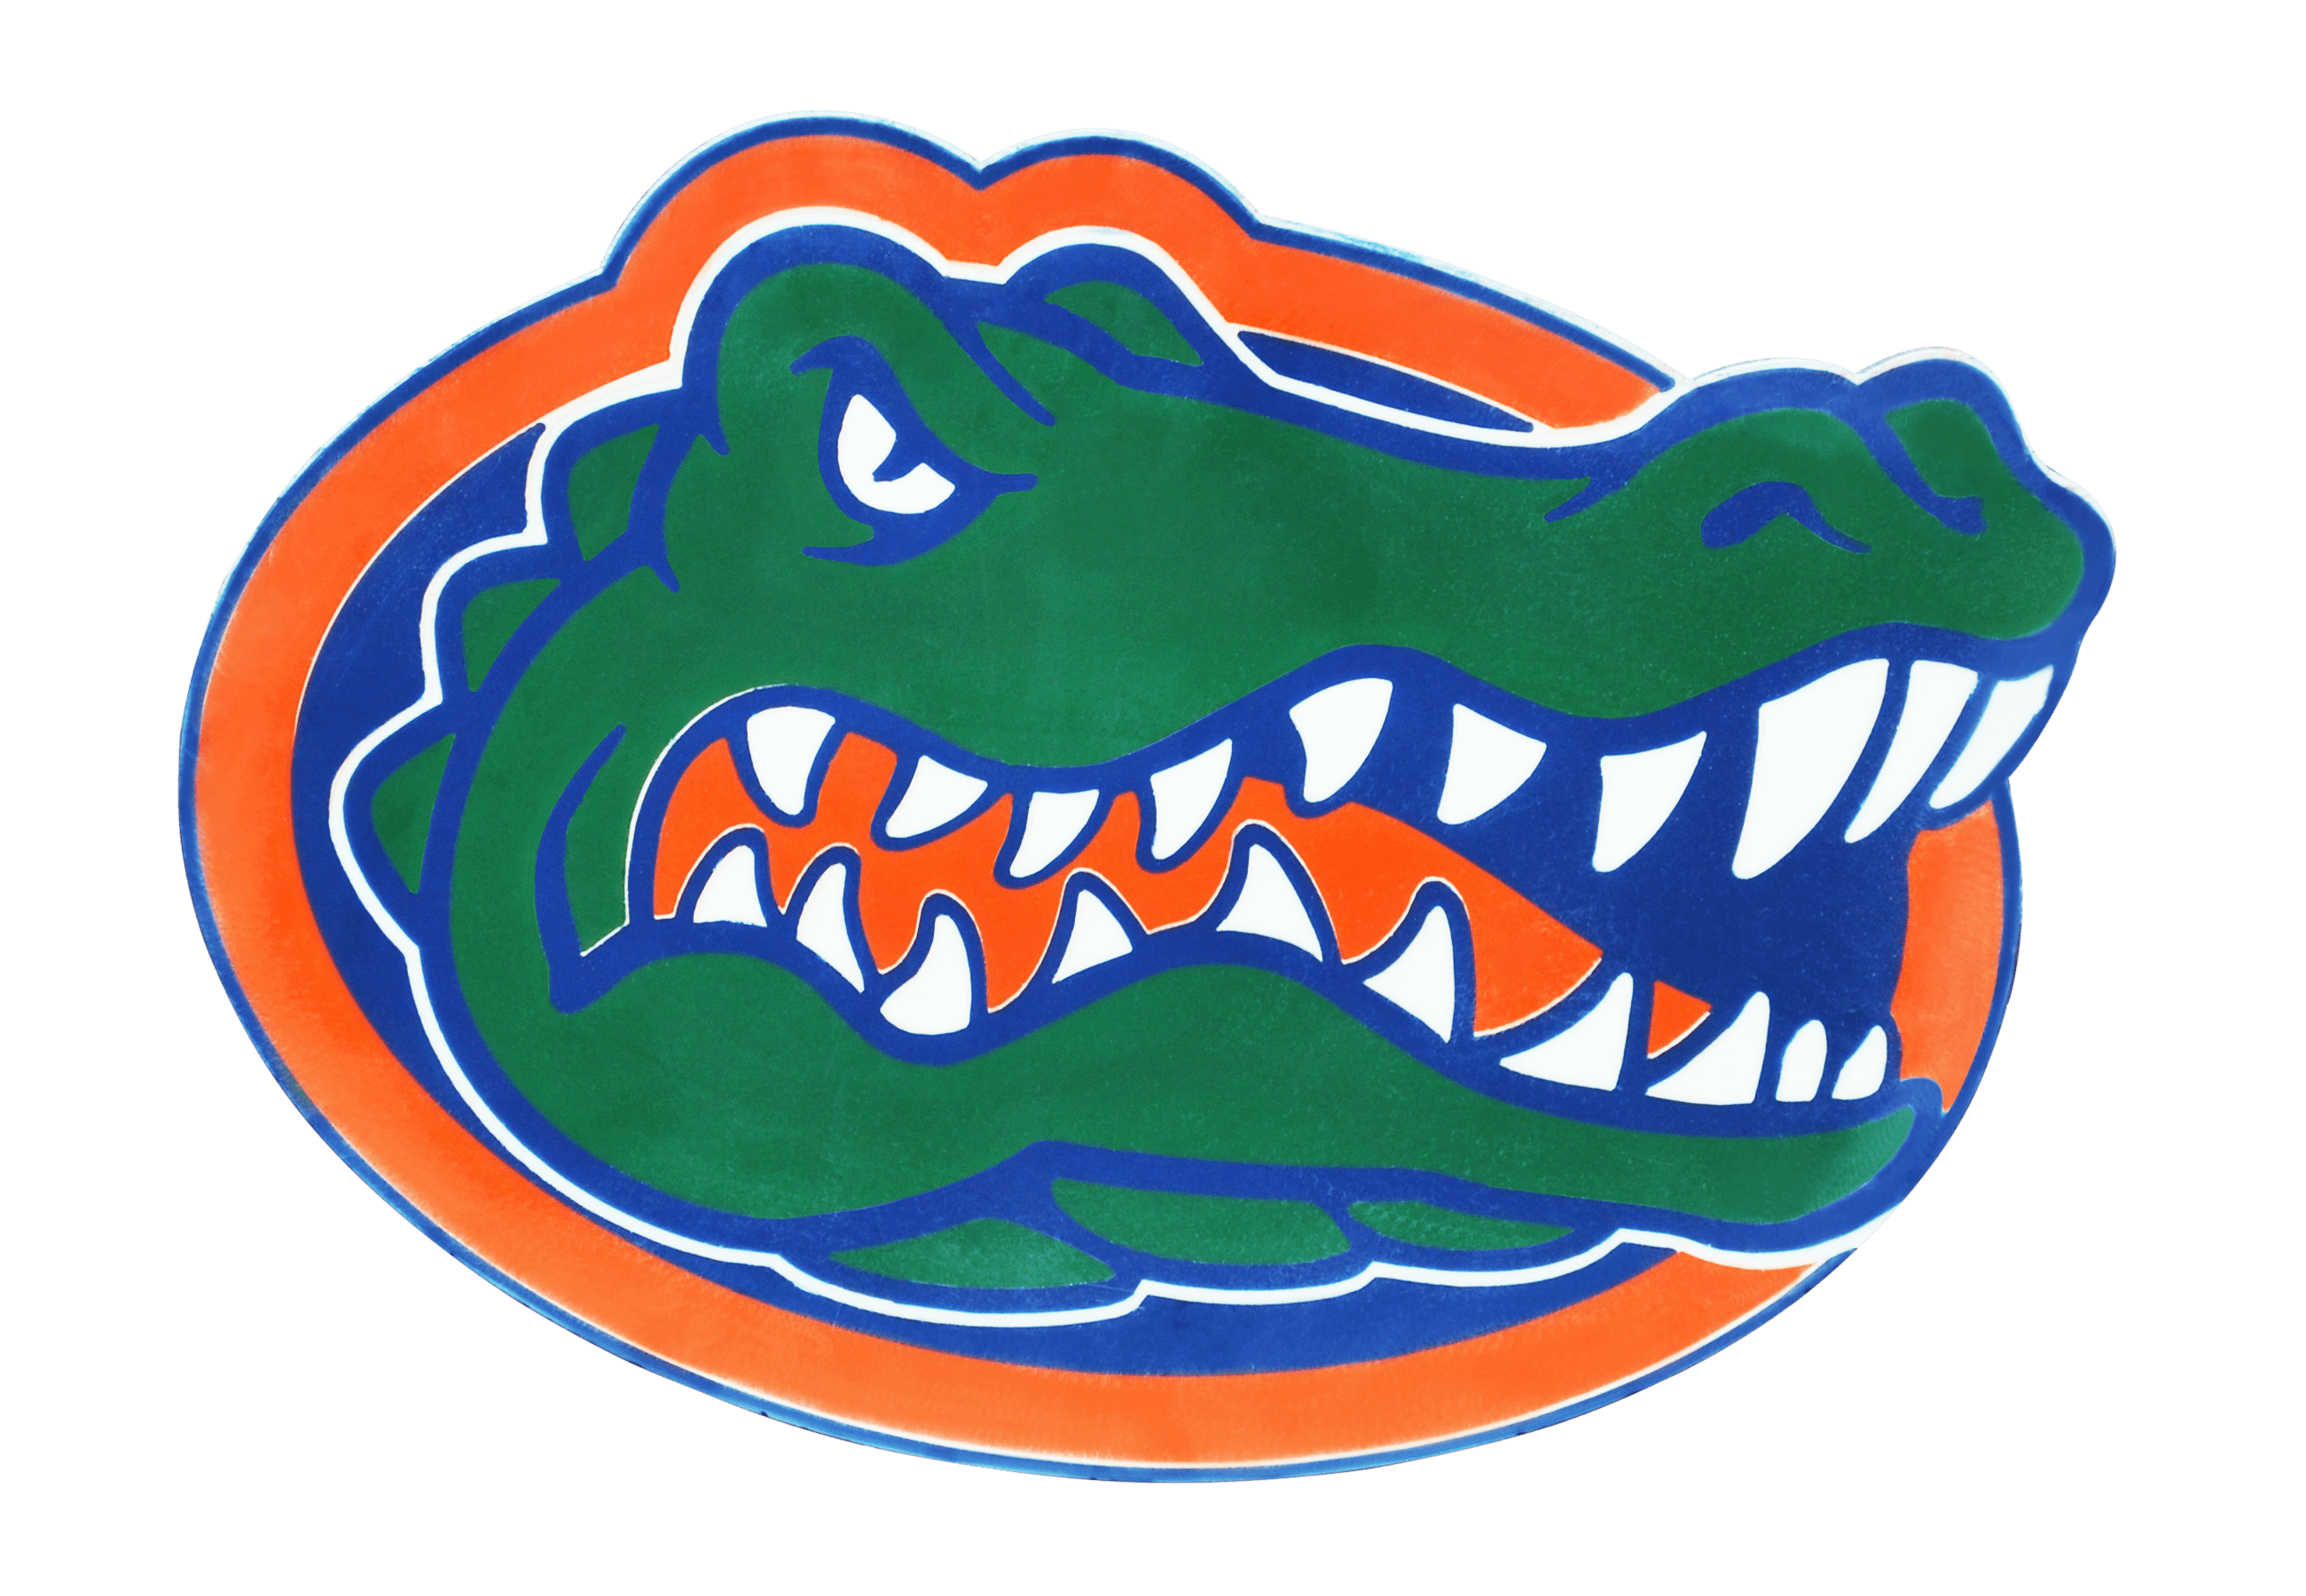 Florida Logo - Florida Gators Logo, Florida Gators Symbol, Meaning, History